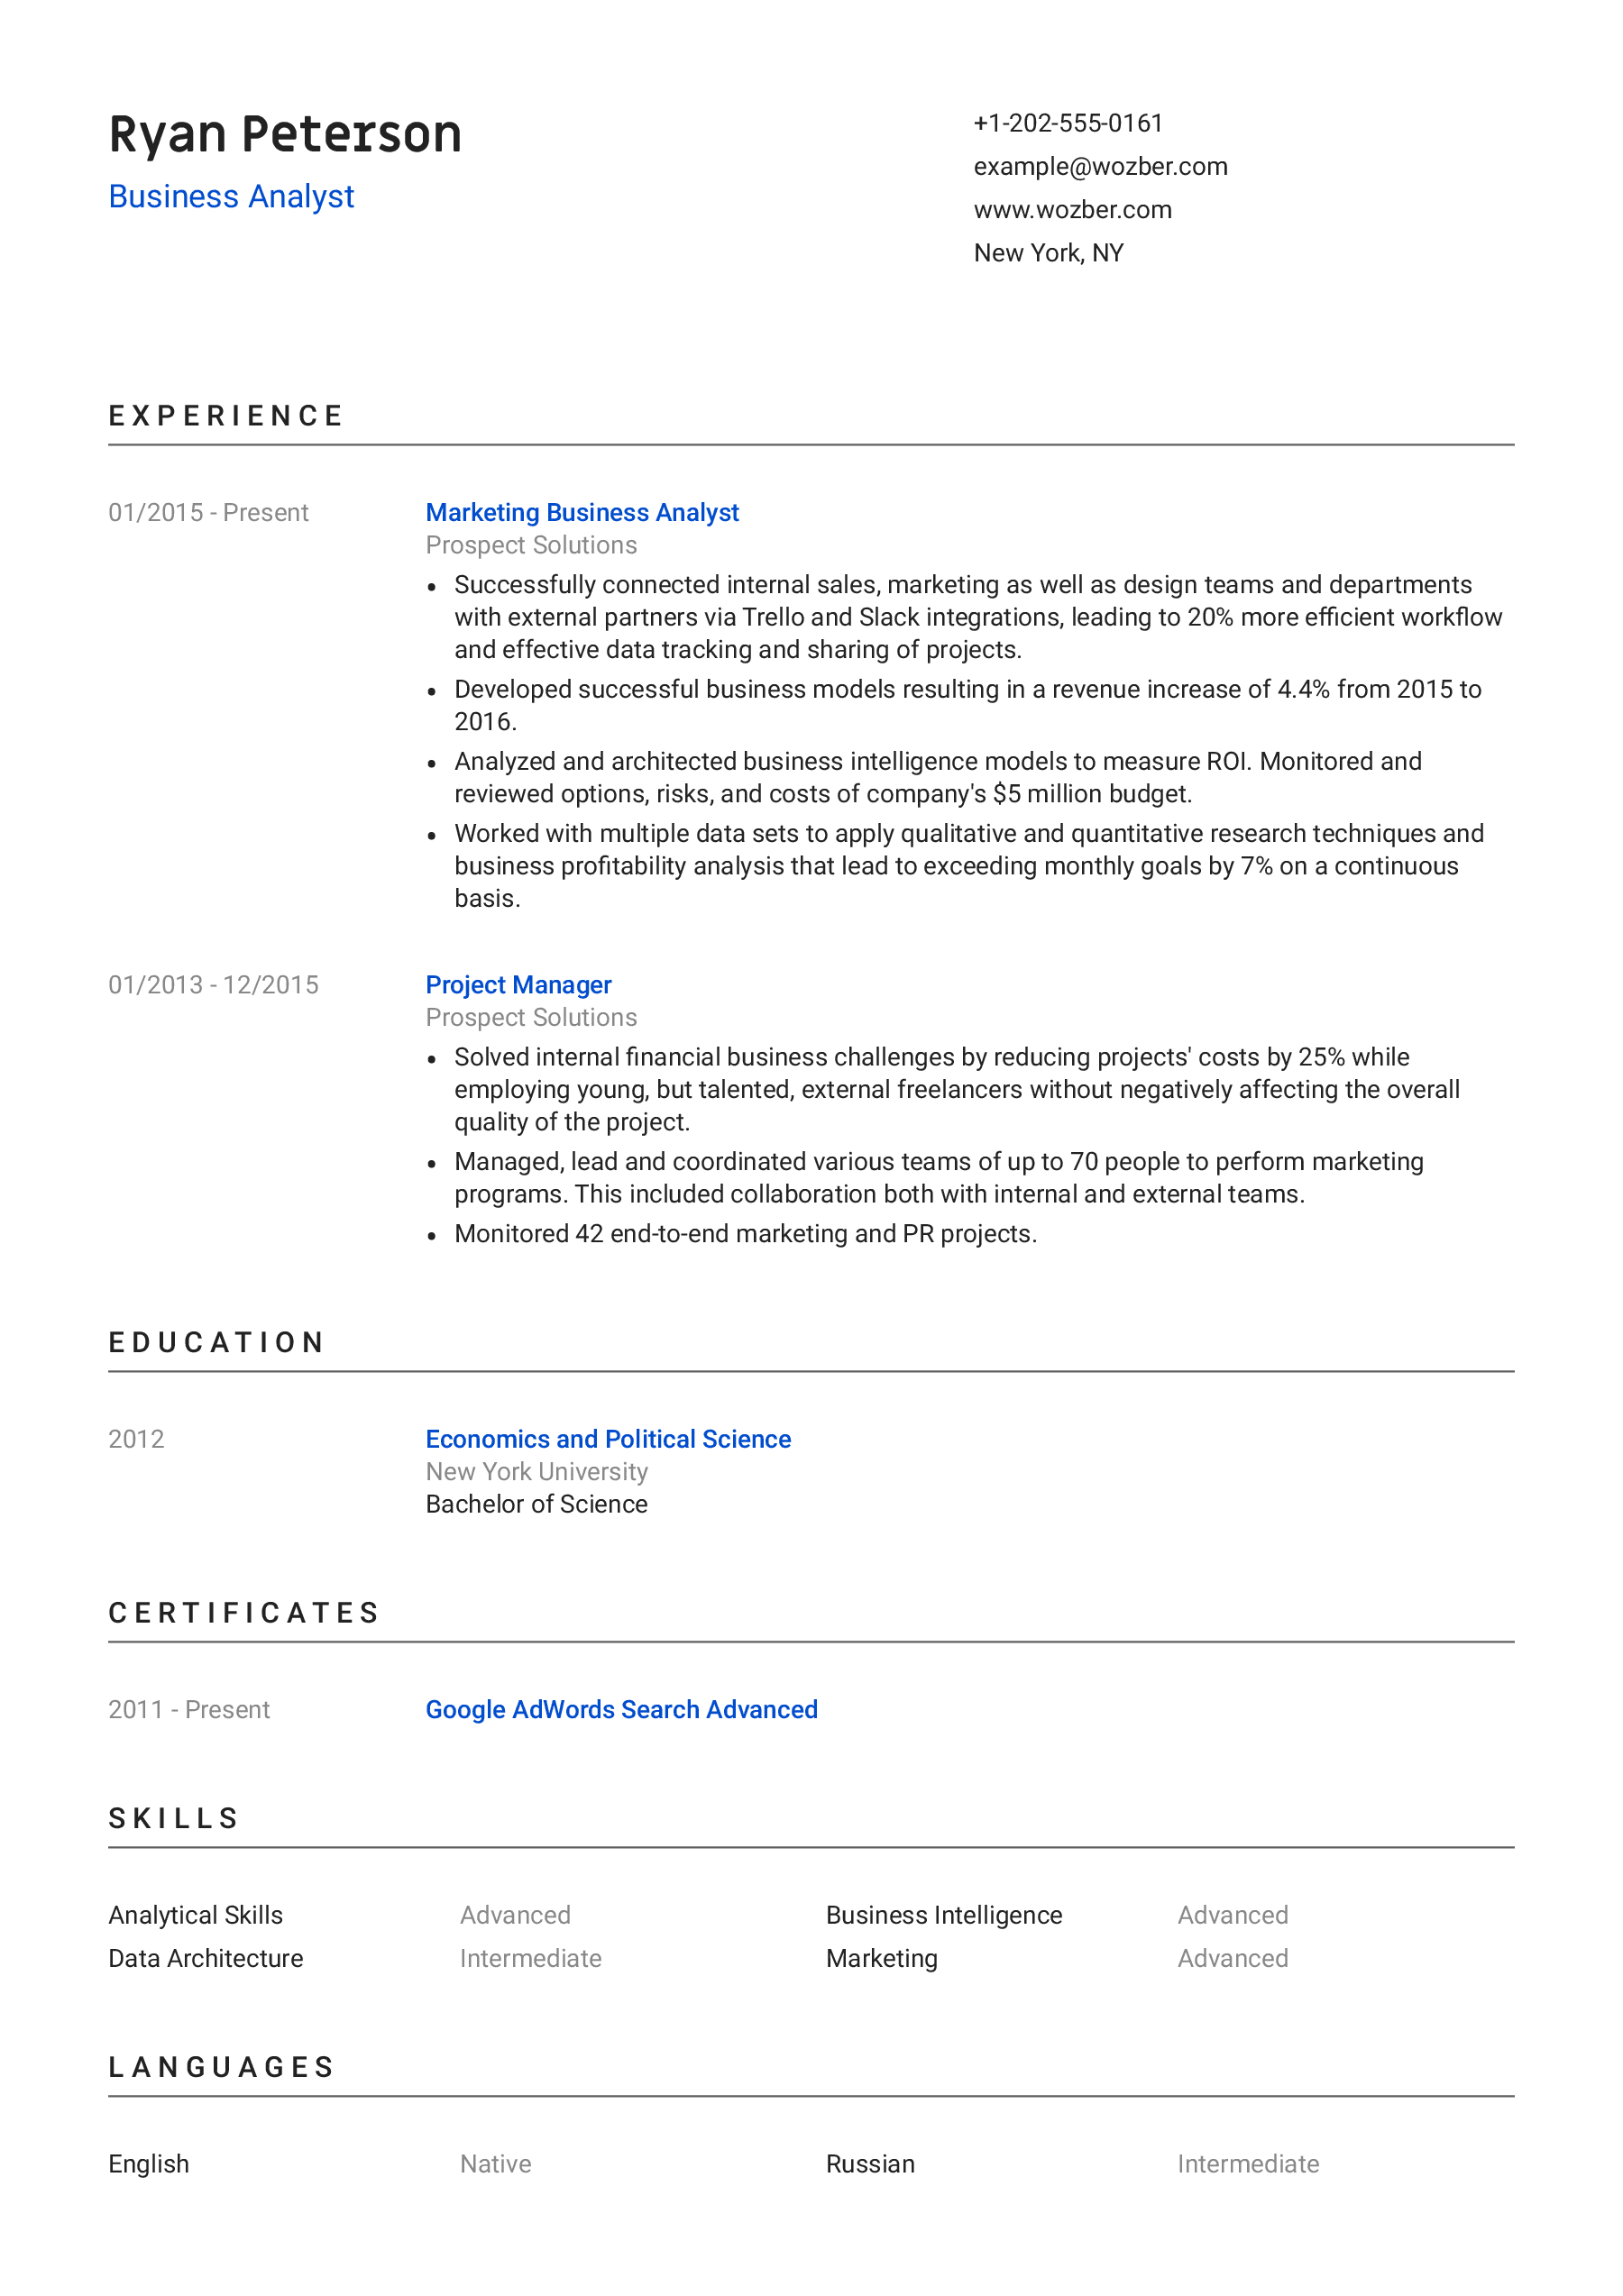 Business analyst CV example